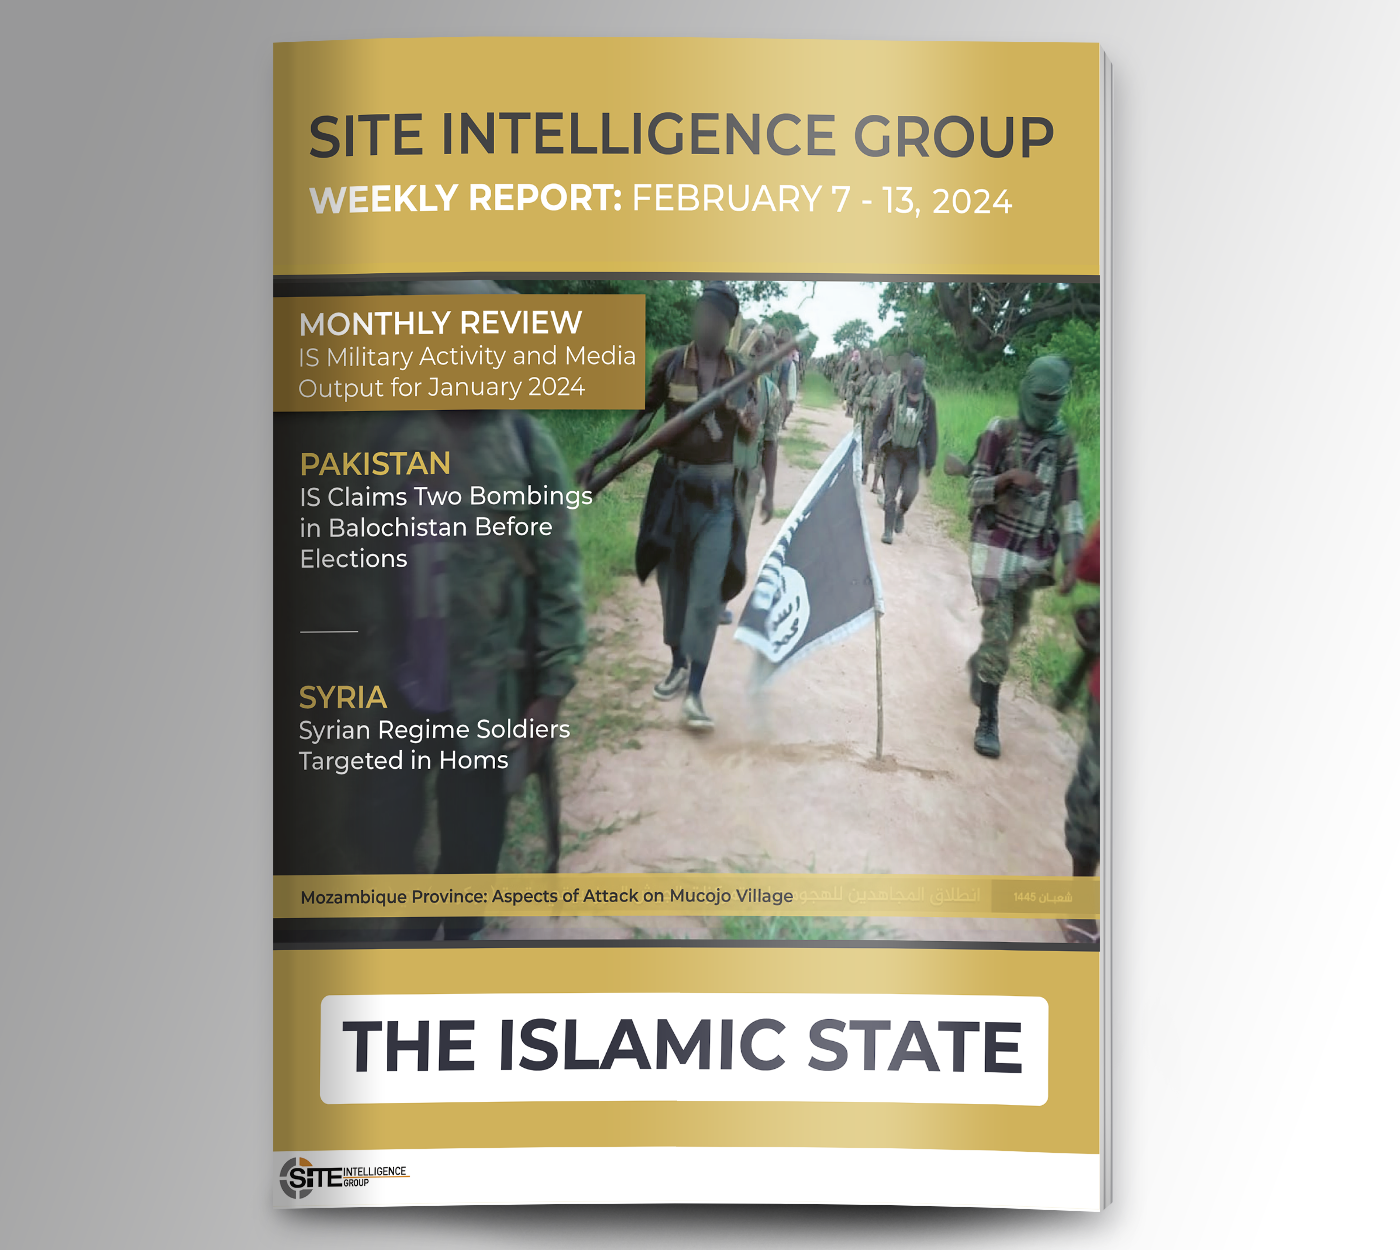 Weekly inSITE on the Islamic State for February 7-13, 2024